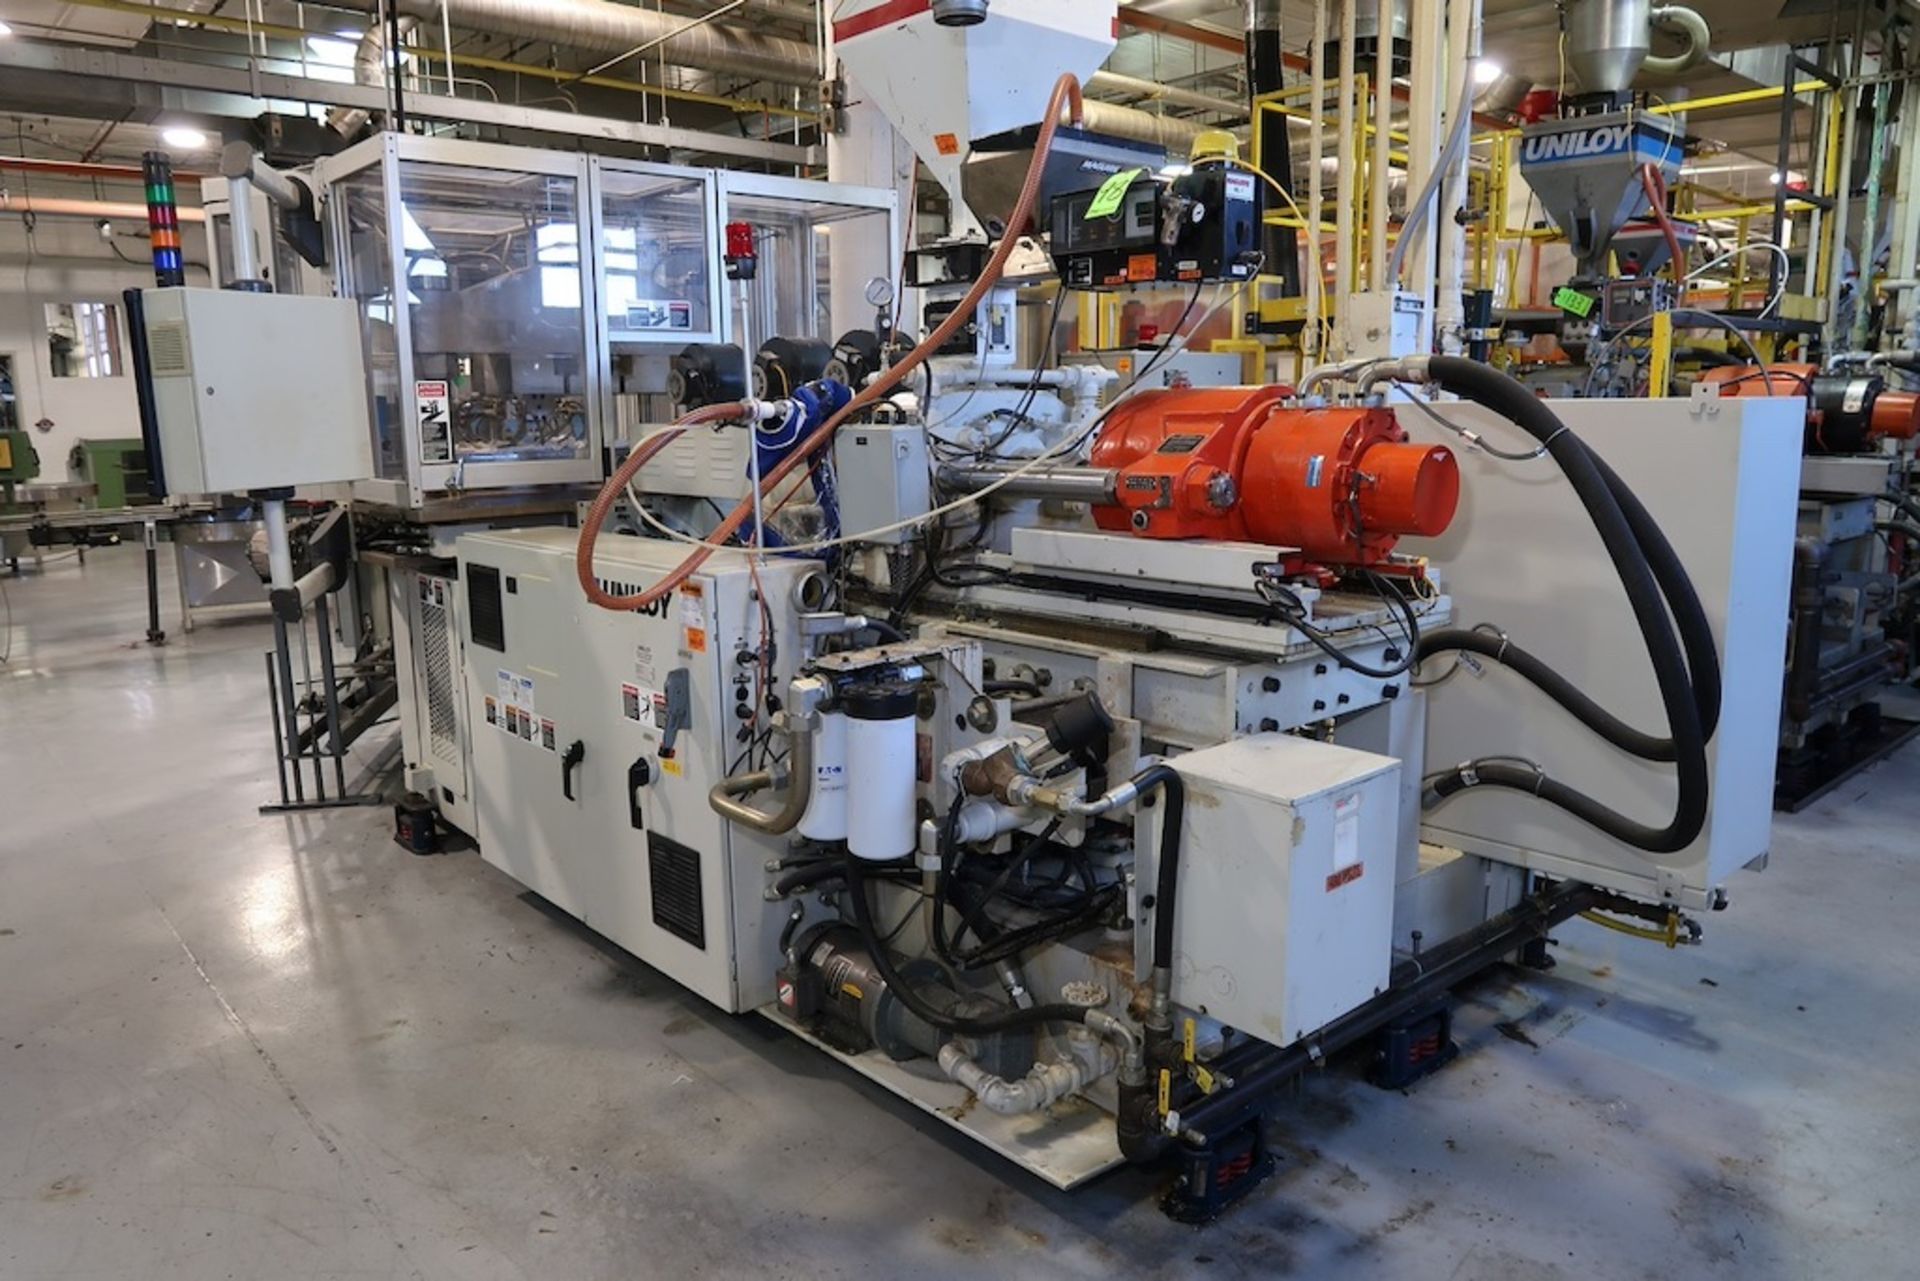 Uniloy IBS-122 Injection Blow Molding Machine, Rebuilt in 2011 - Image 10 of 18